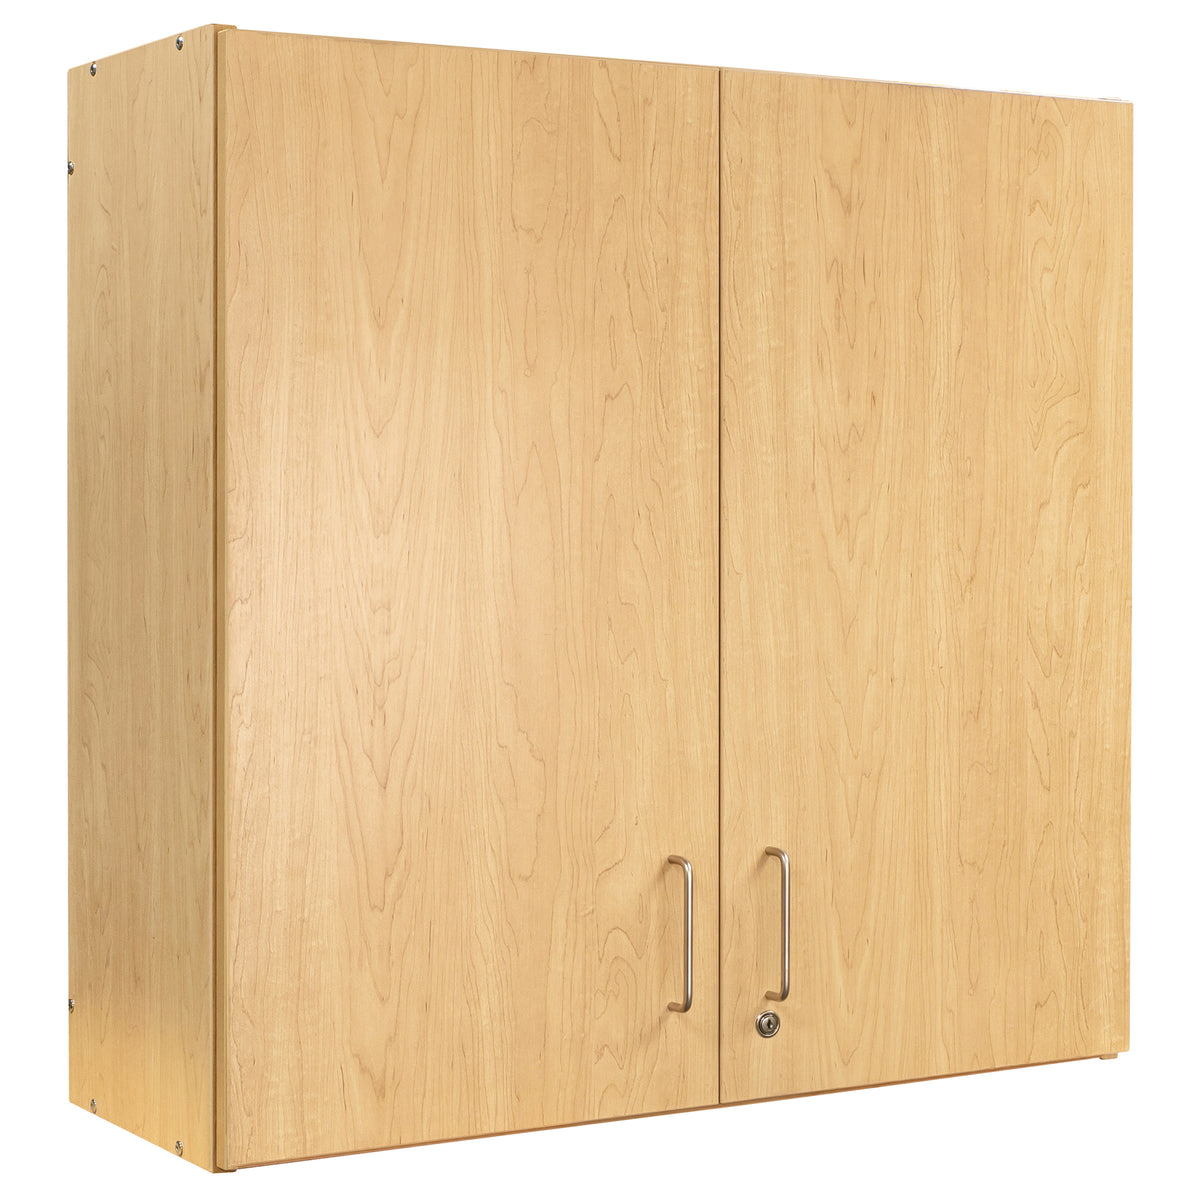 Four compartment Classroom Maple Wood Wall Cabinet with Silver Metal Handles